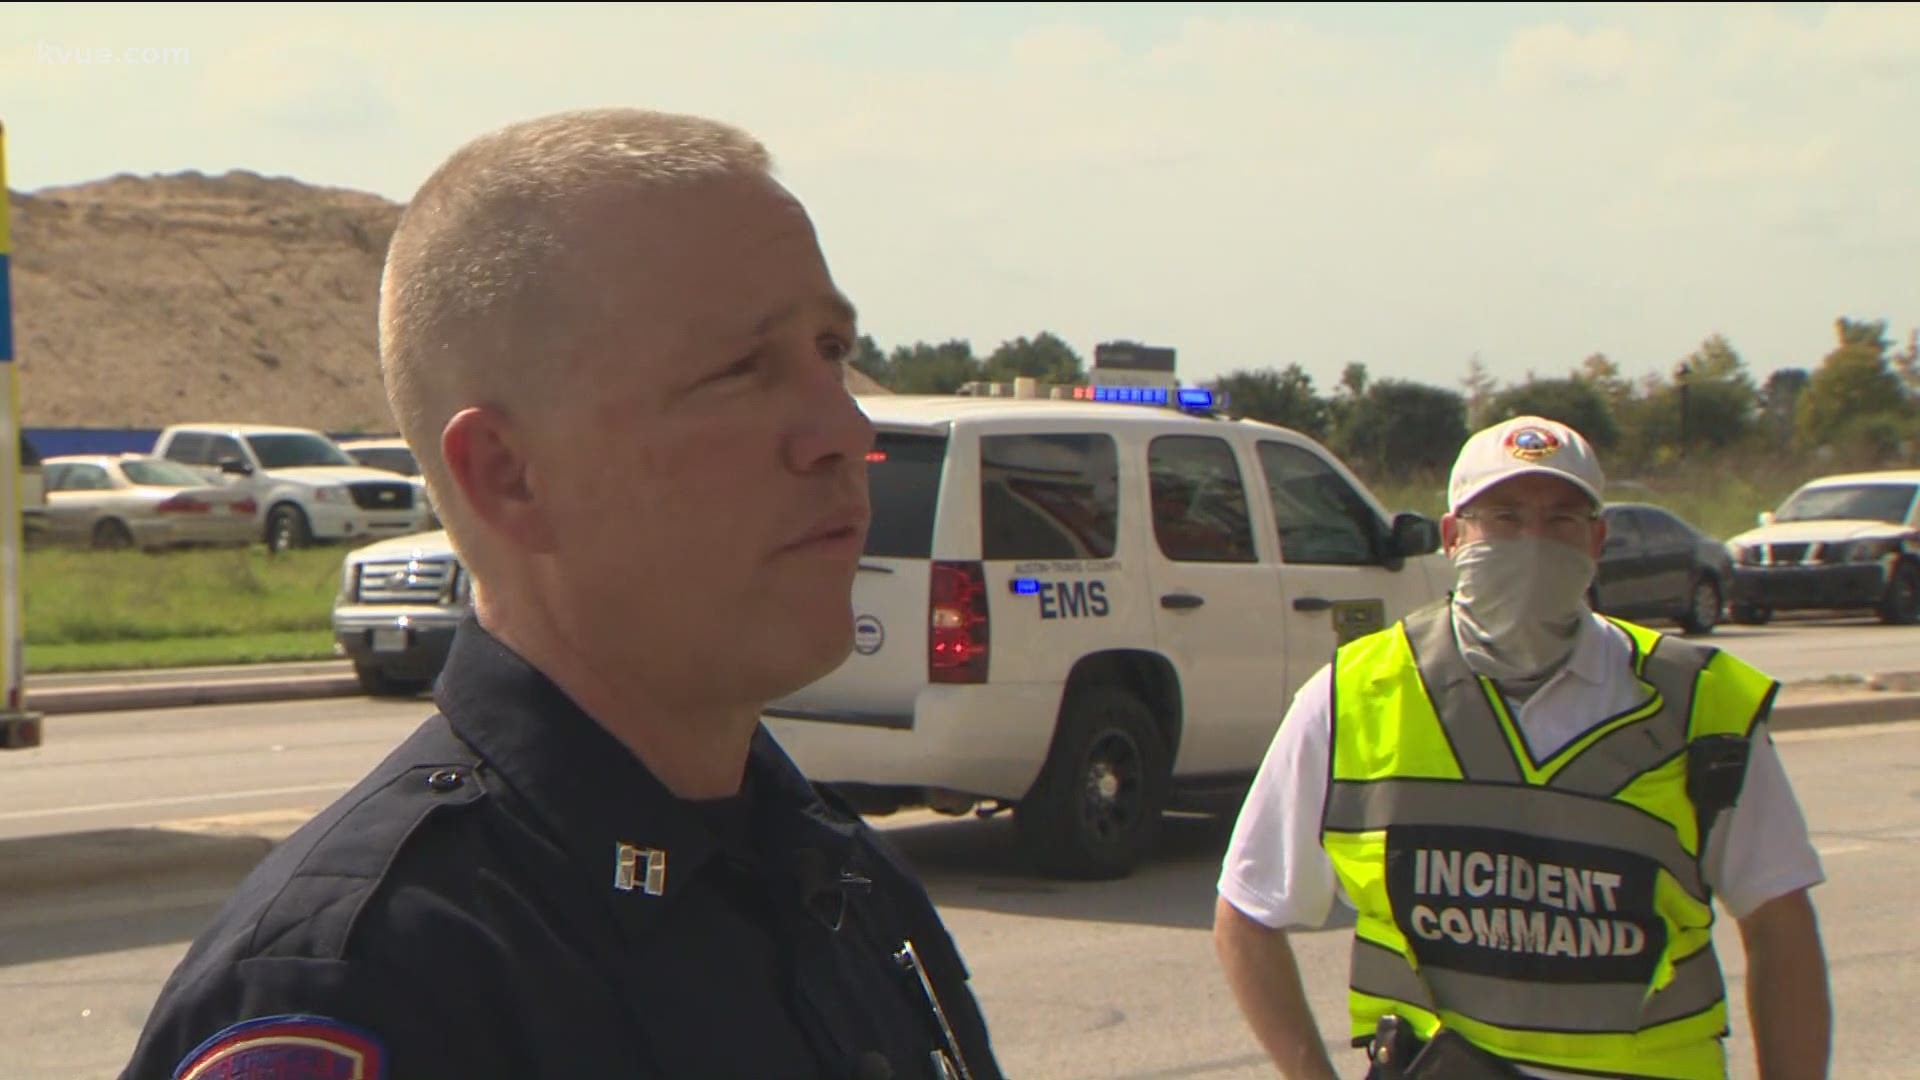 Officials provide an update after two cranes collide, injuring at least 20 people.